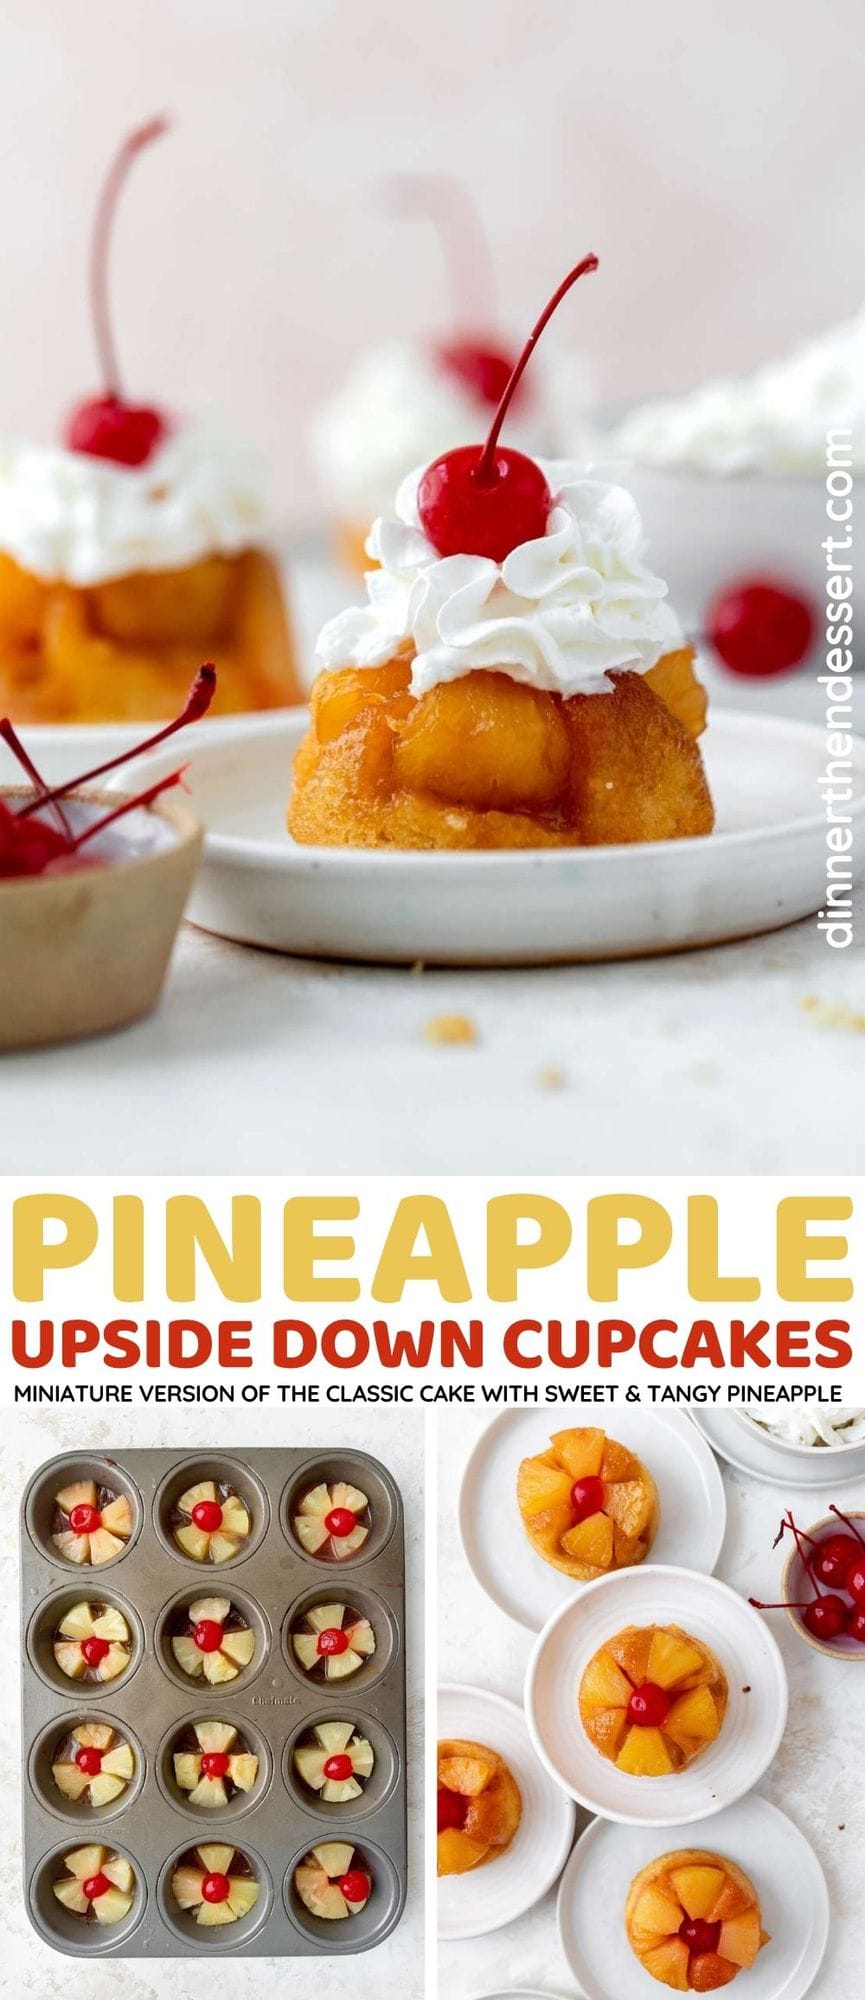 Pineapple Upside Down Cupcakes collage